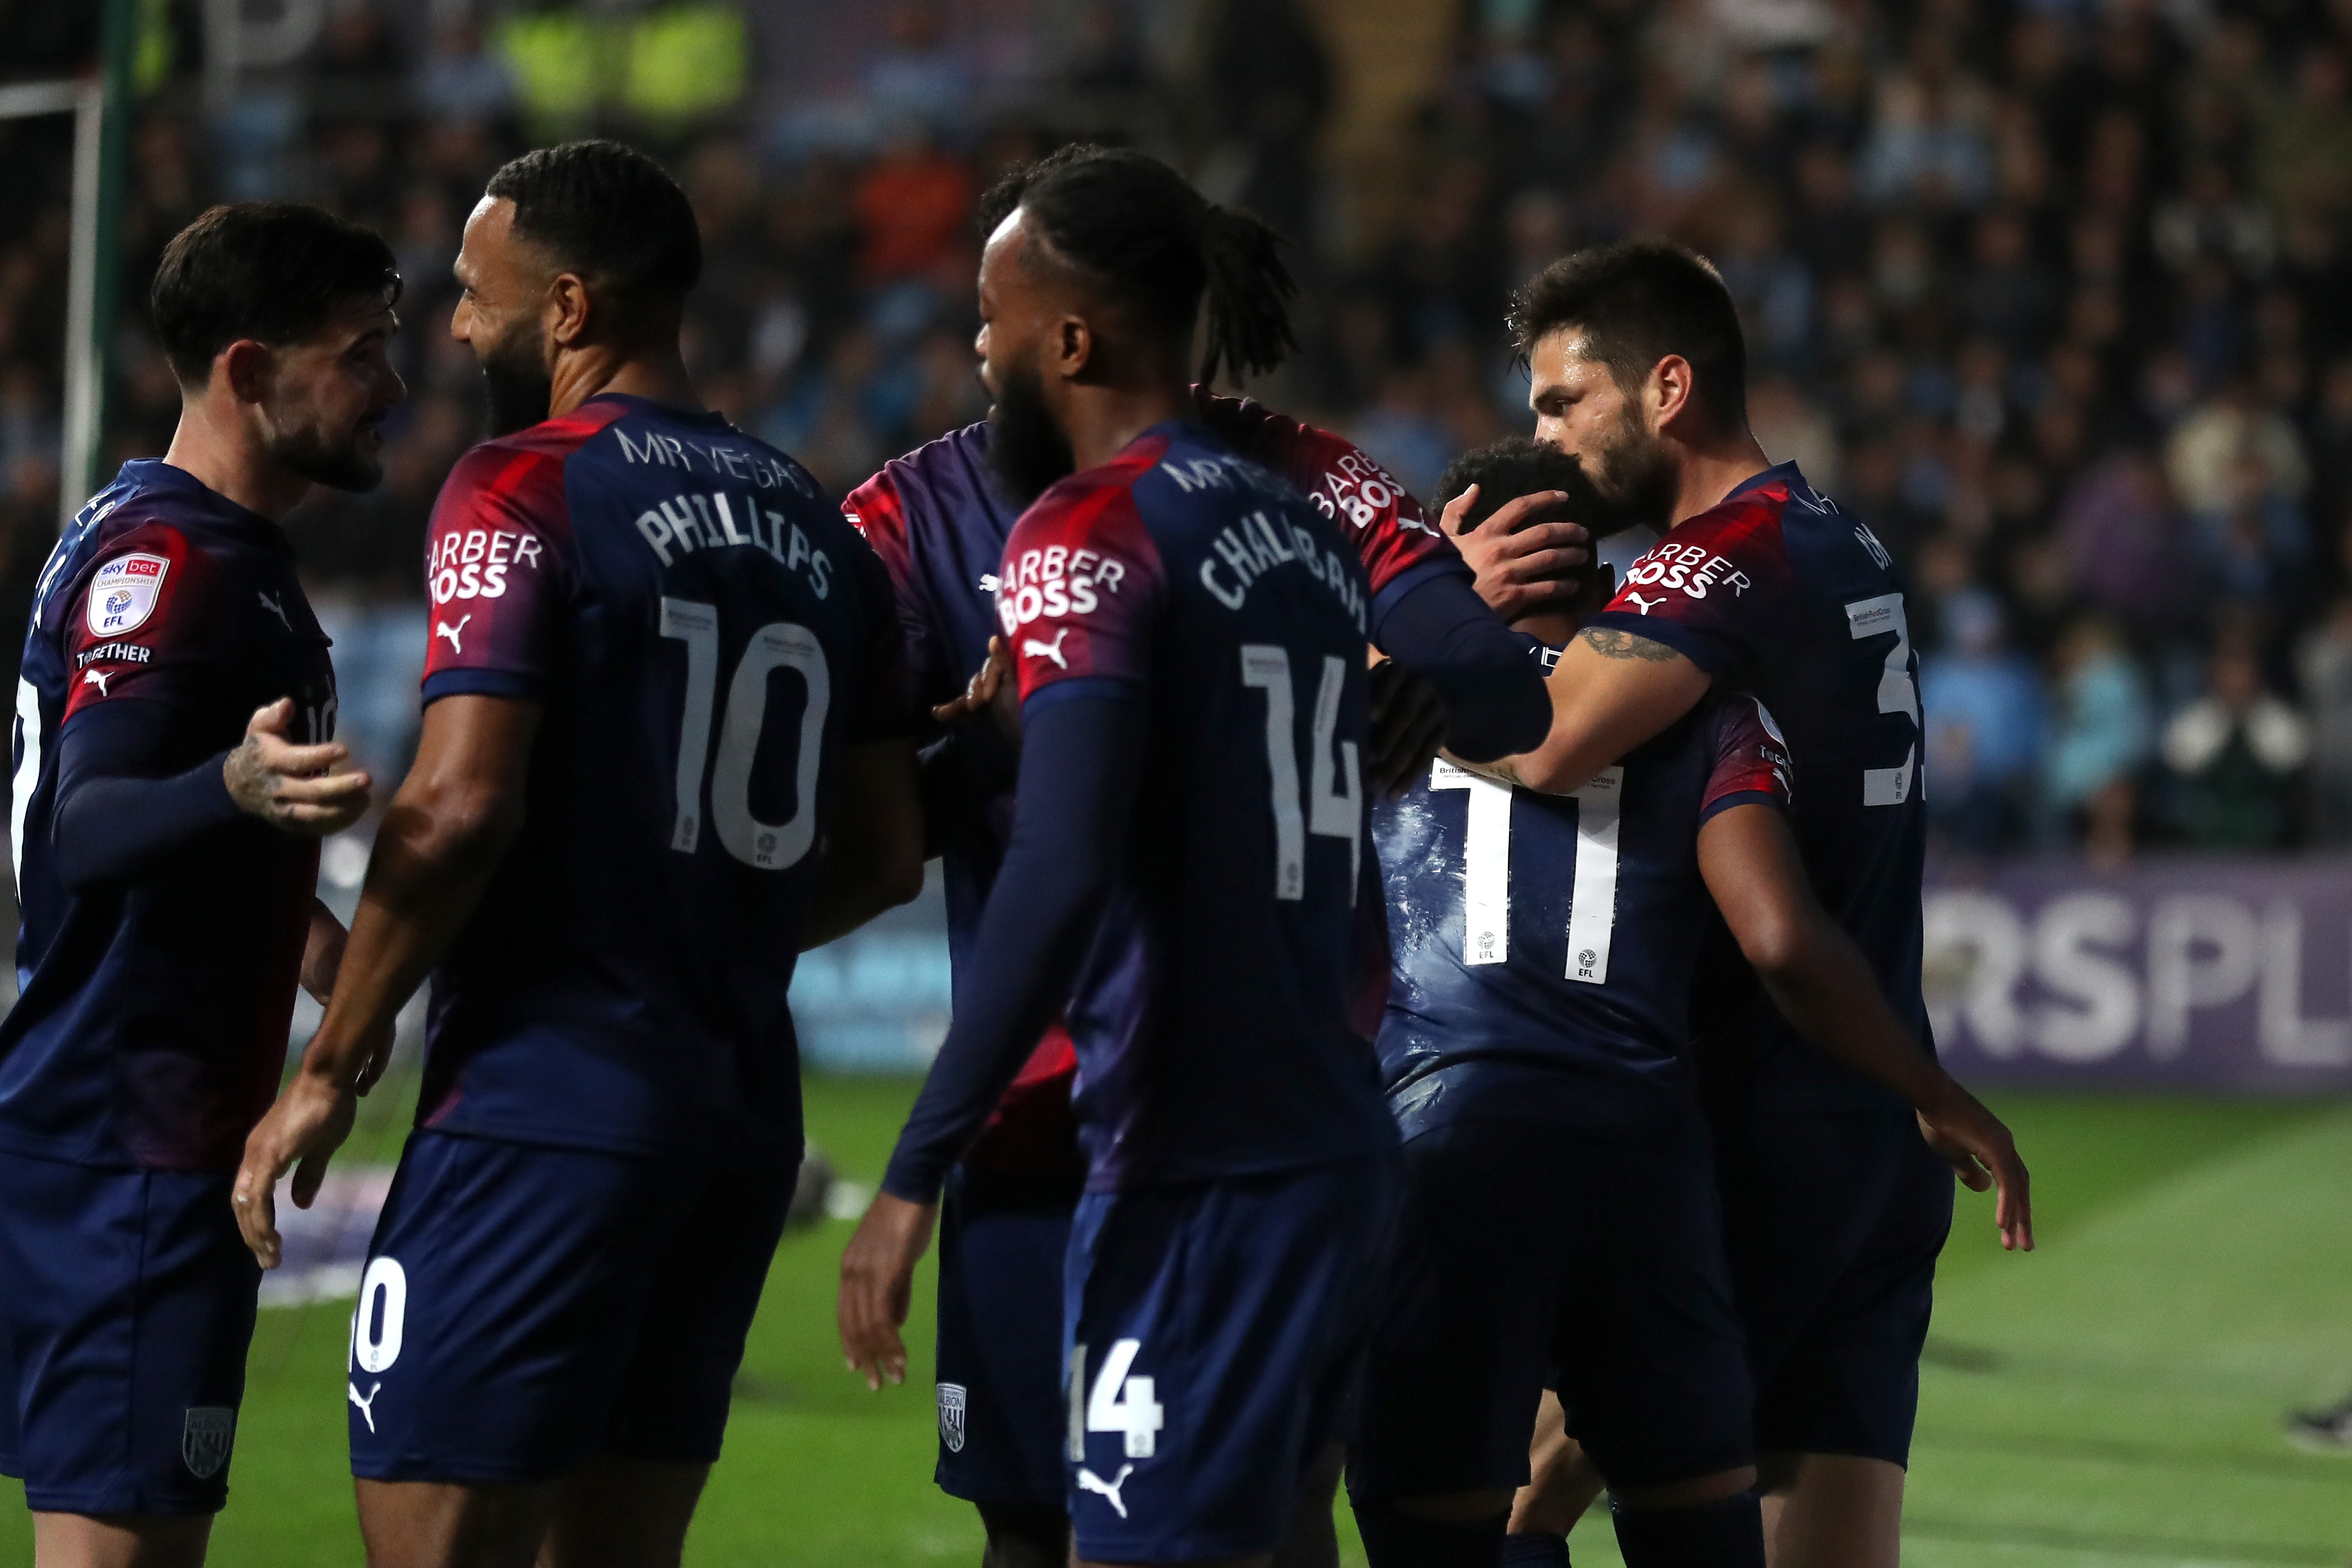 Albion players celebrate the first goal against Coventry